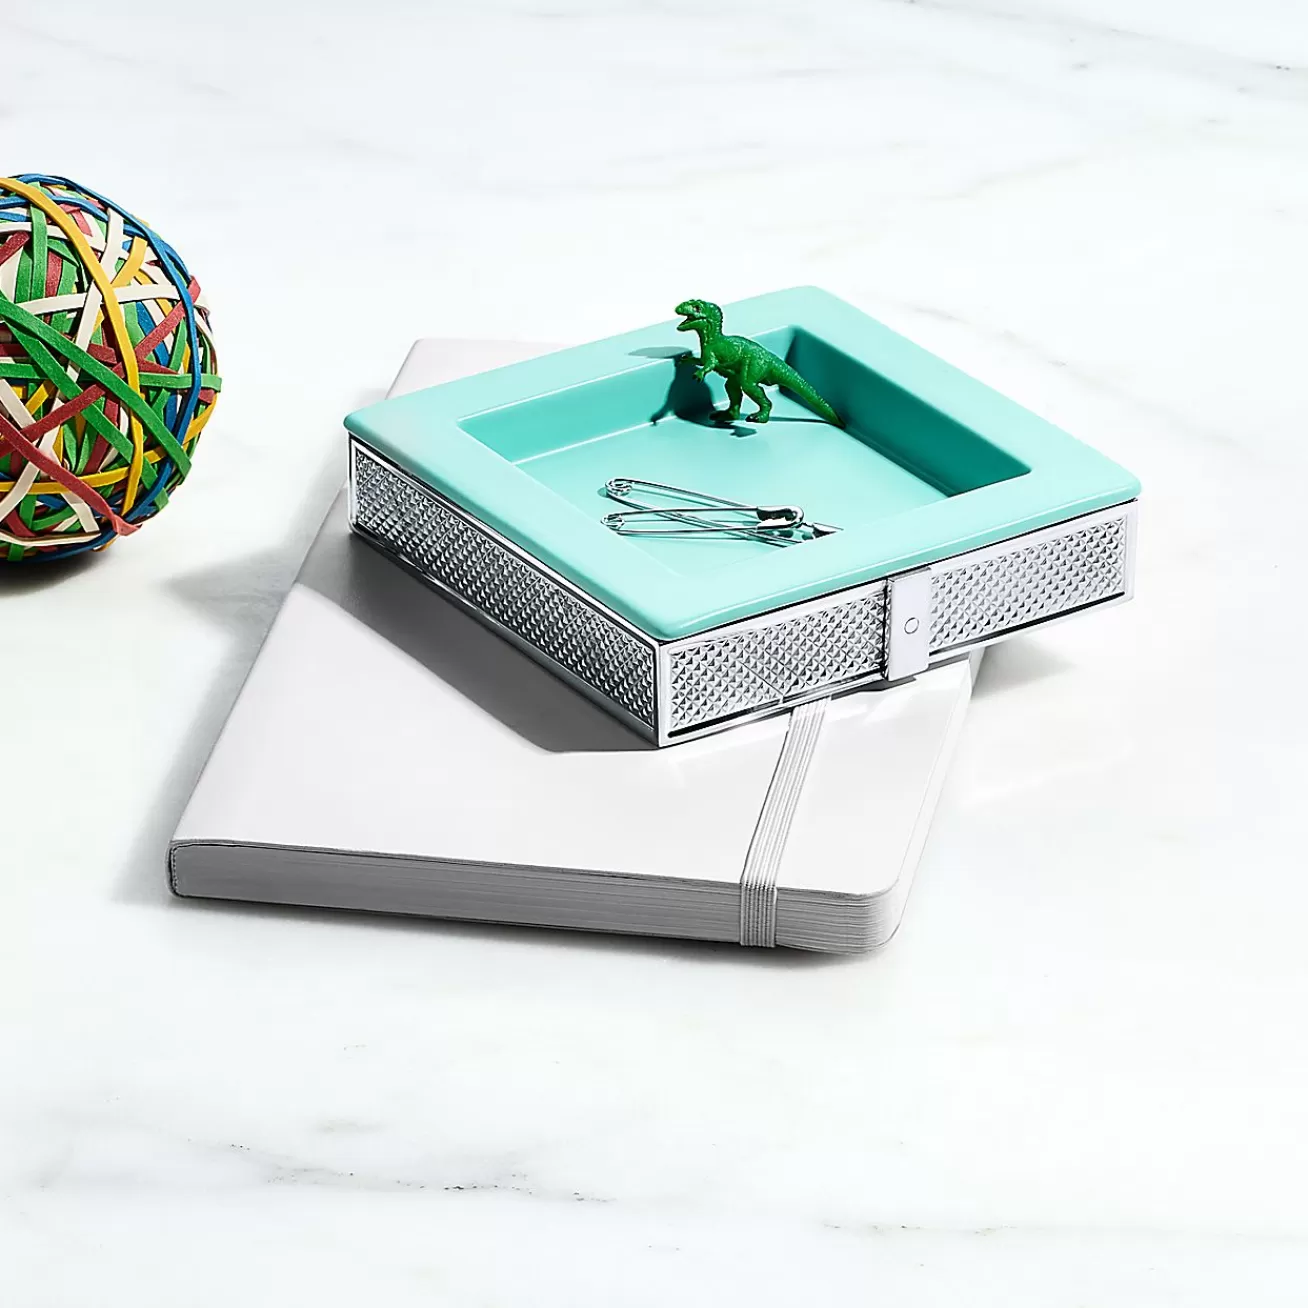 Tiffany & Co. Diamond Point square dish in Tiffany Blue® porcelain and sterling silver. | ^ Tiffany Blue® Gifts | Business Gifts